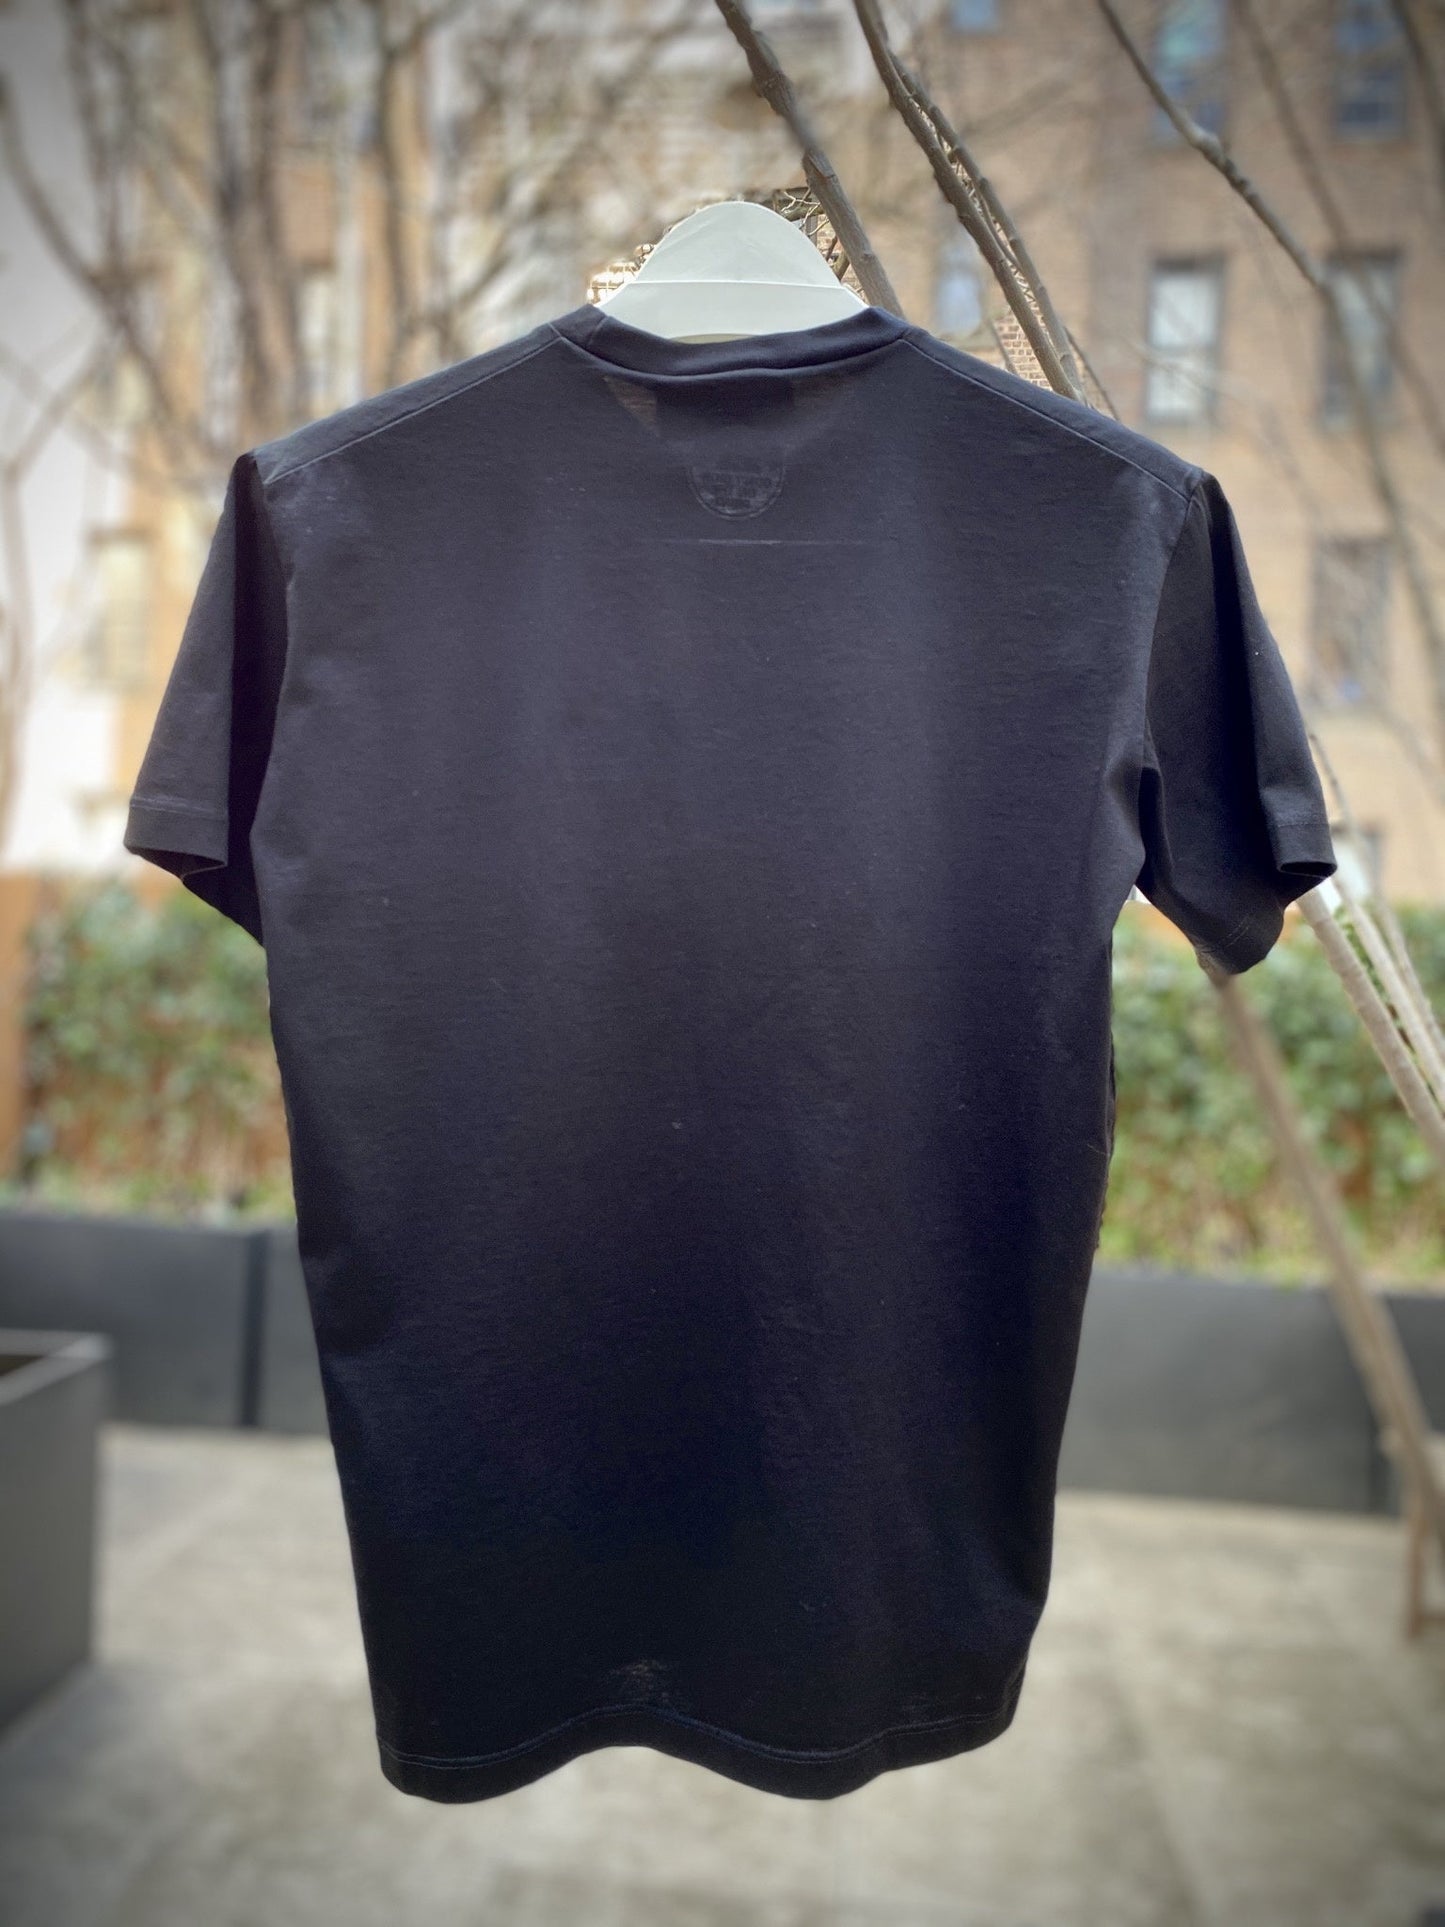 A black DSQUARED2 S71GD1021 t-shirt hanging on a tree.